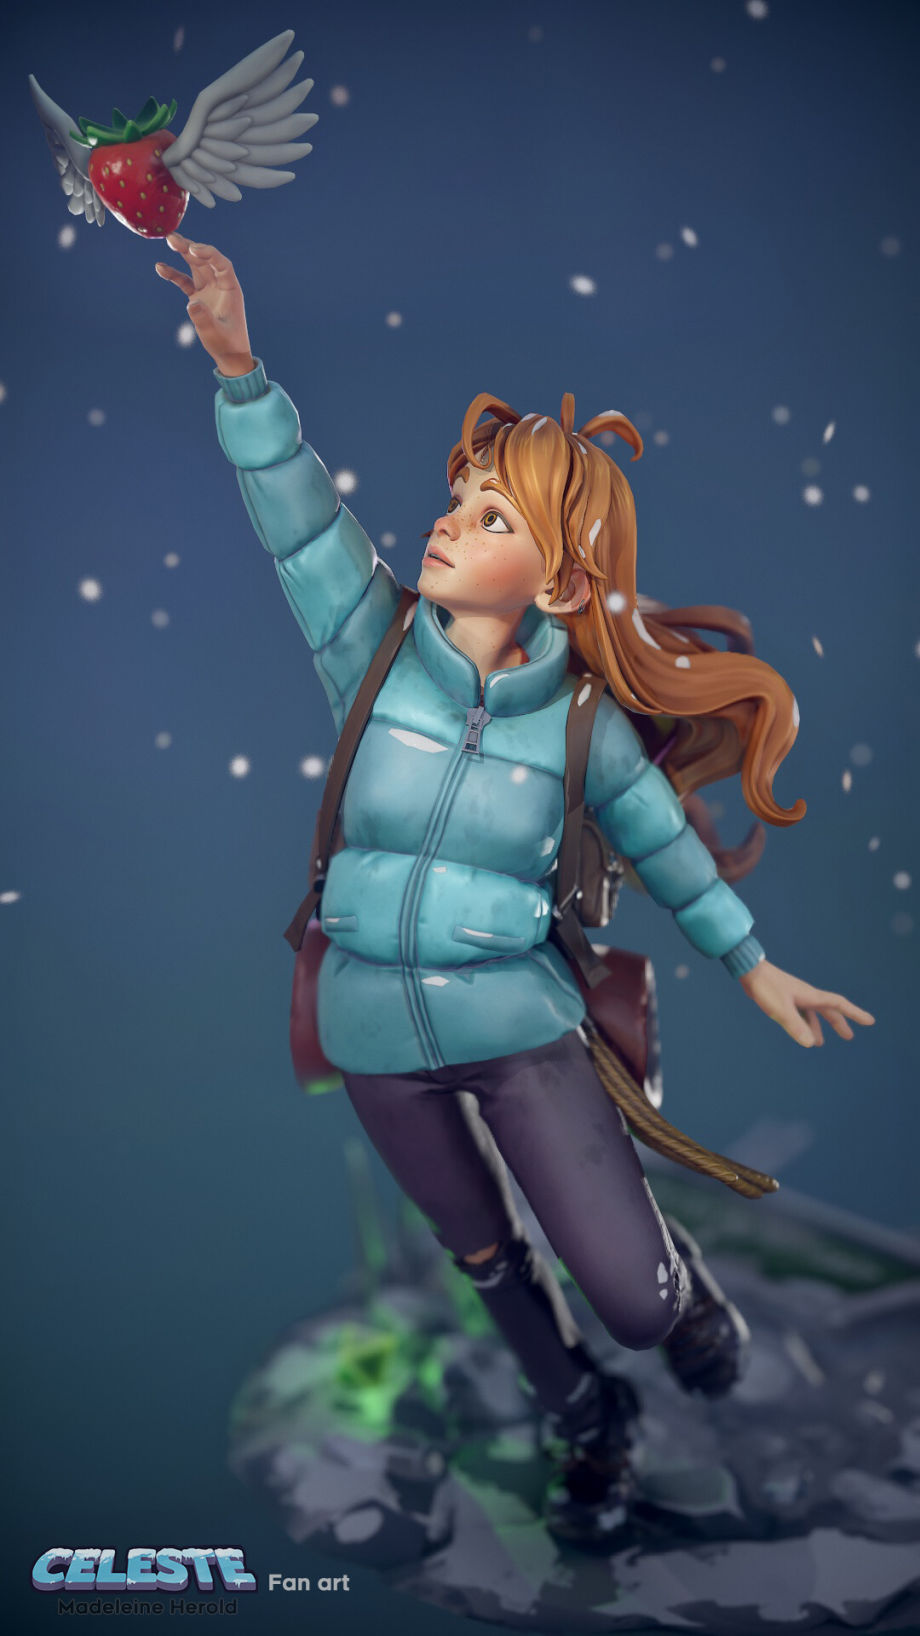 Celeste Fan Art: Highlighting Character with Texturing & Pose